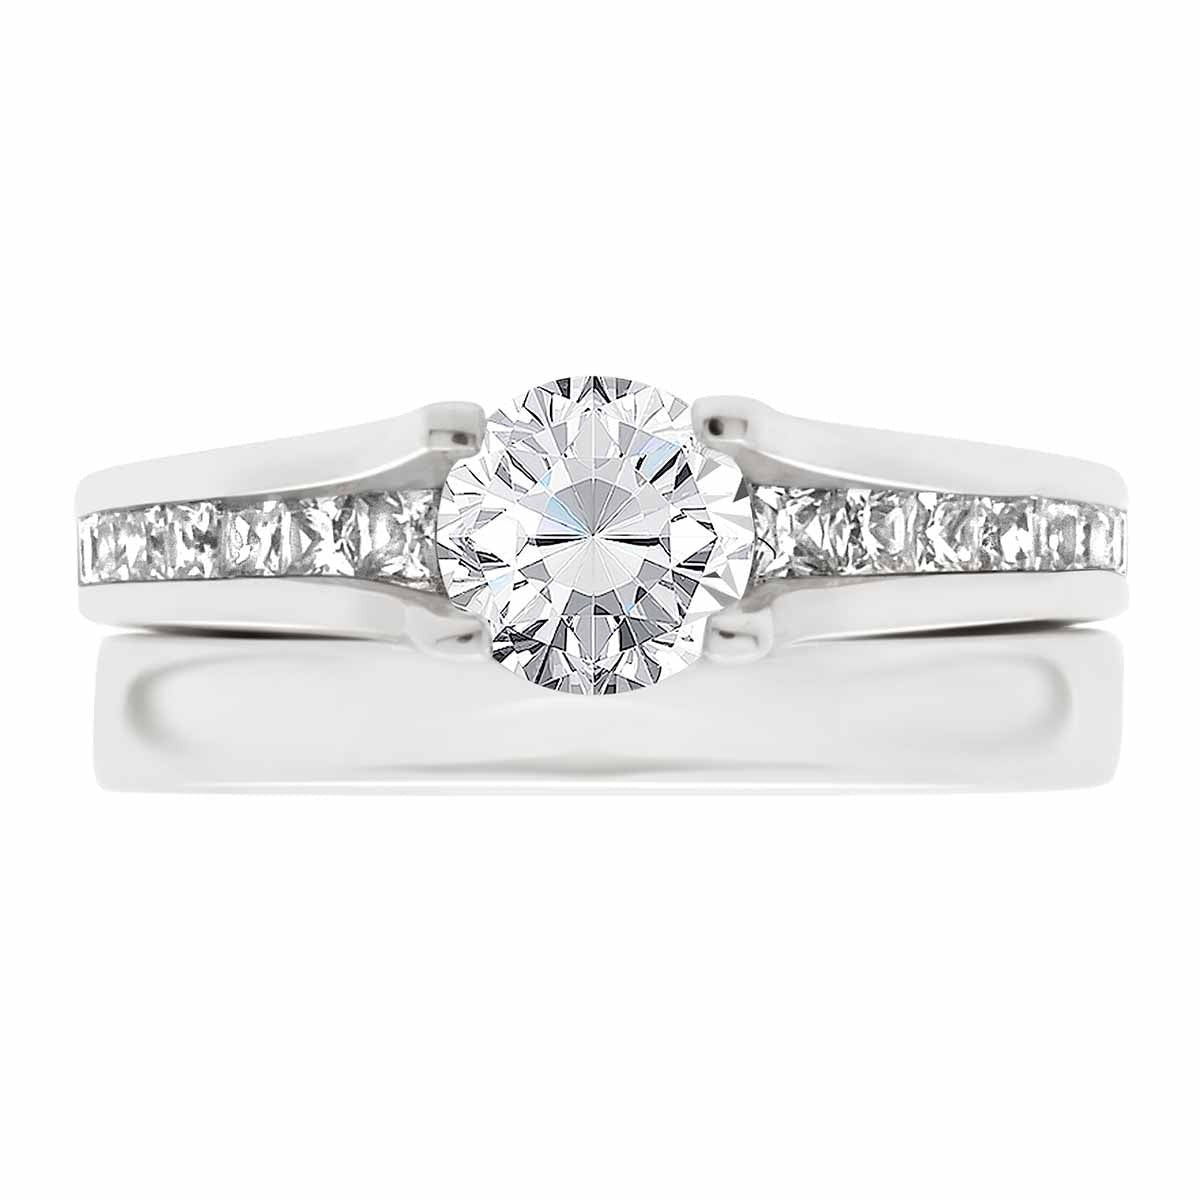 Channel Set Diamond Ring set in white gold pictured with a matching plain wedding ring